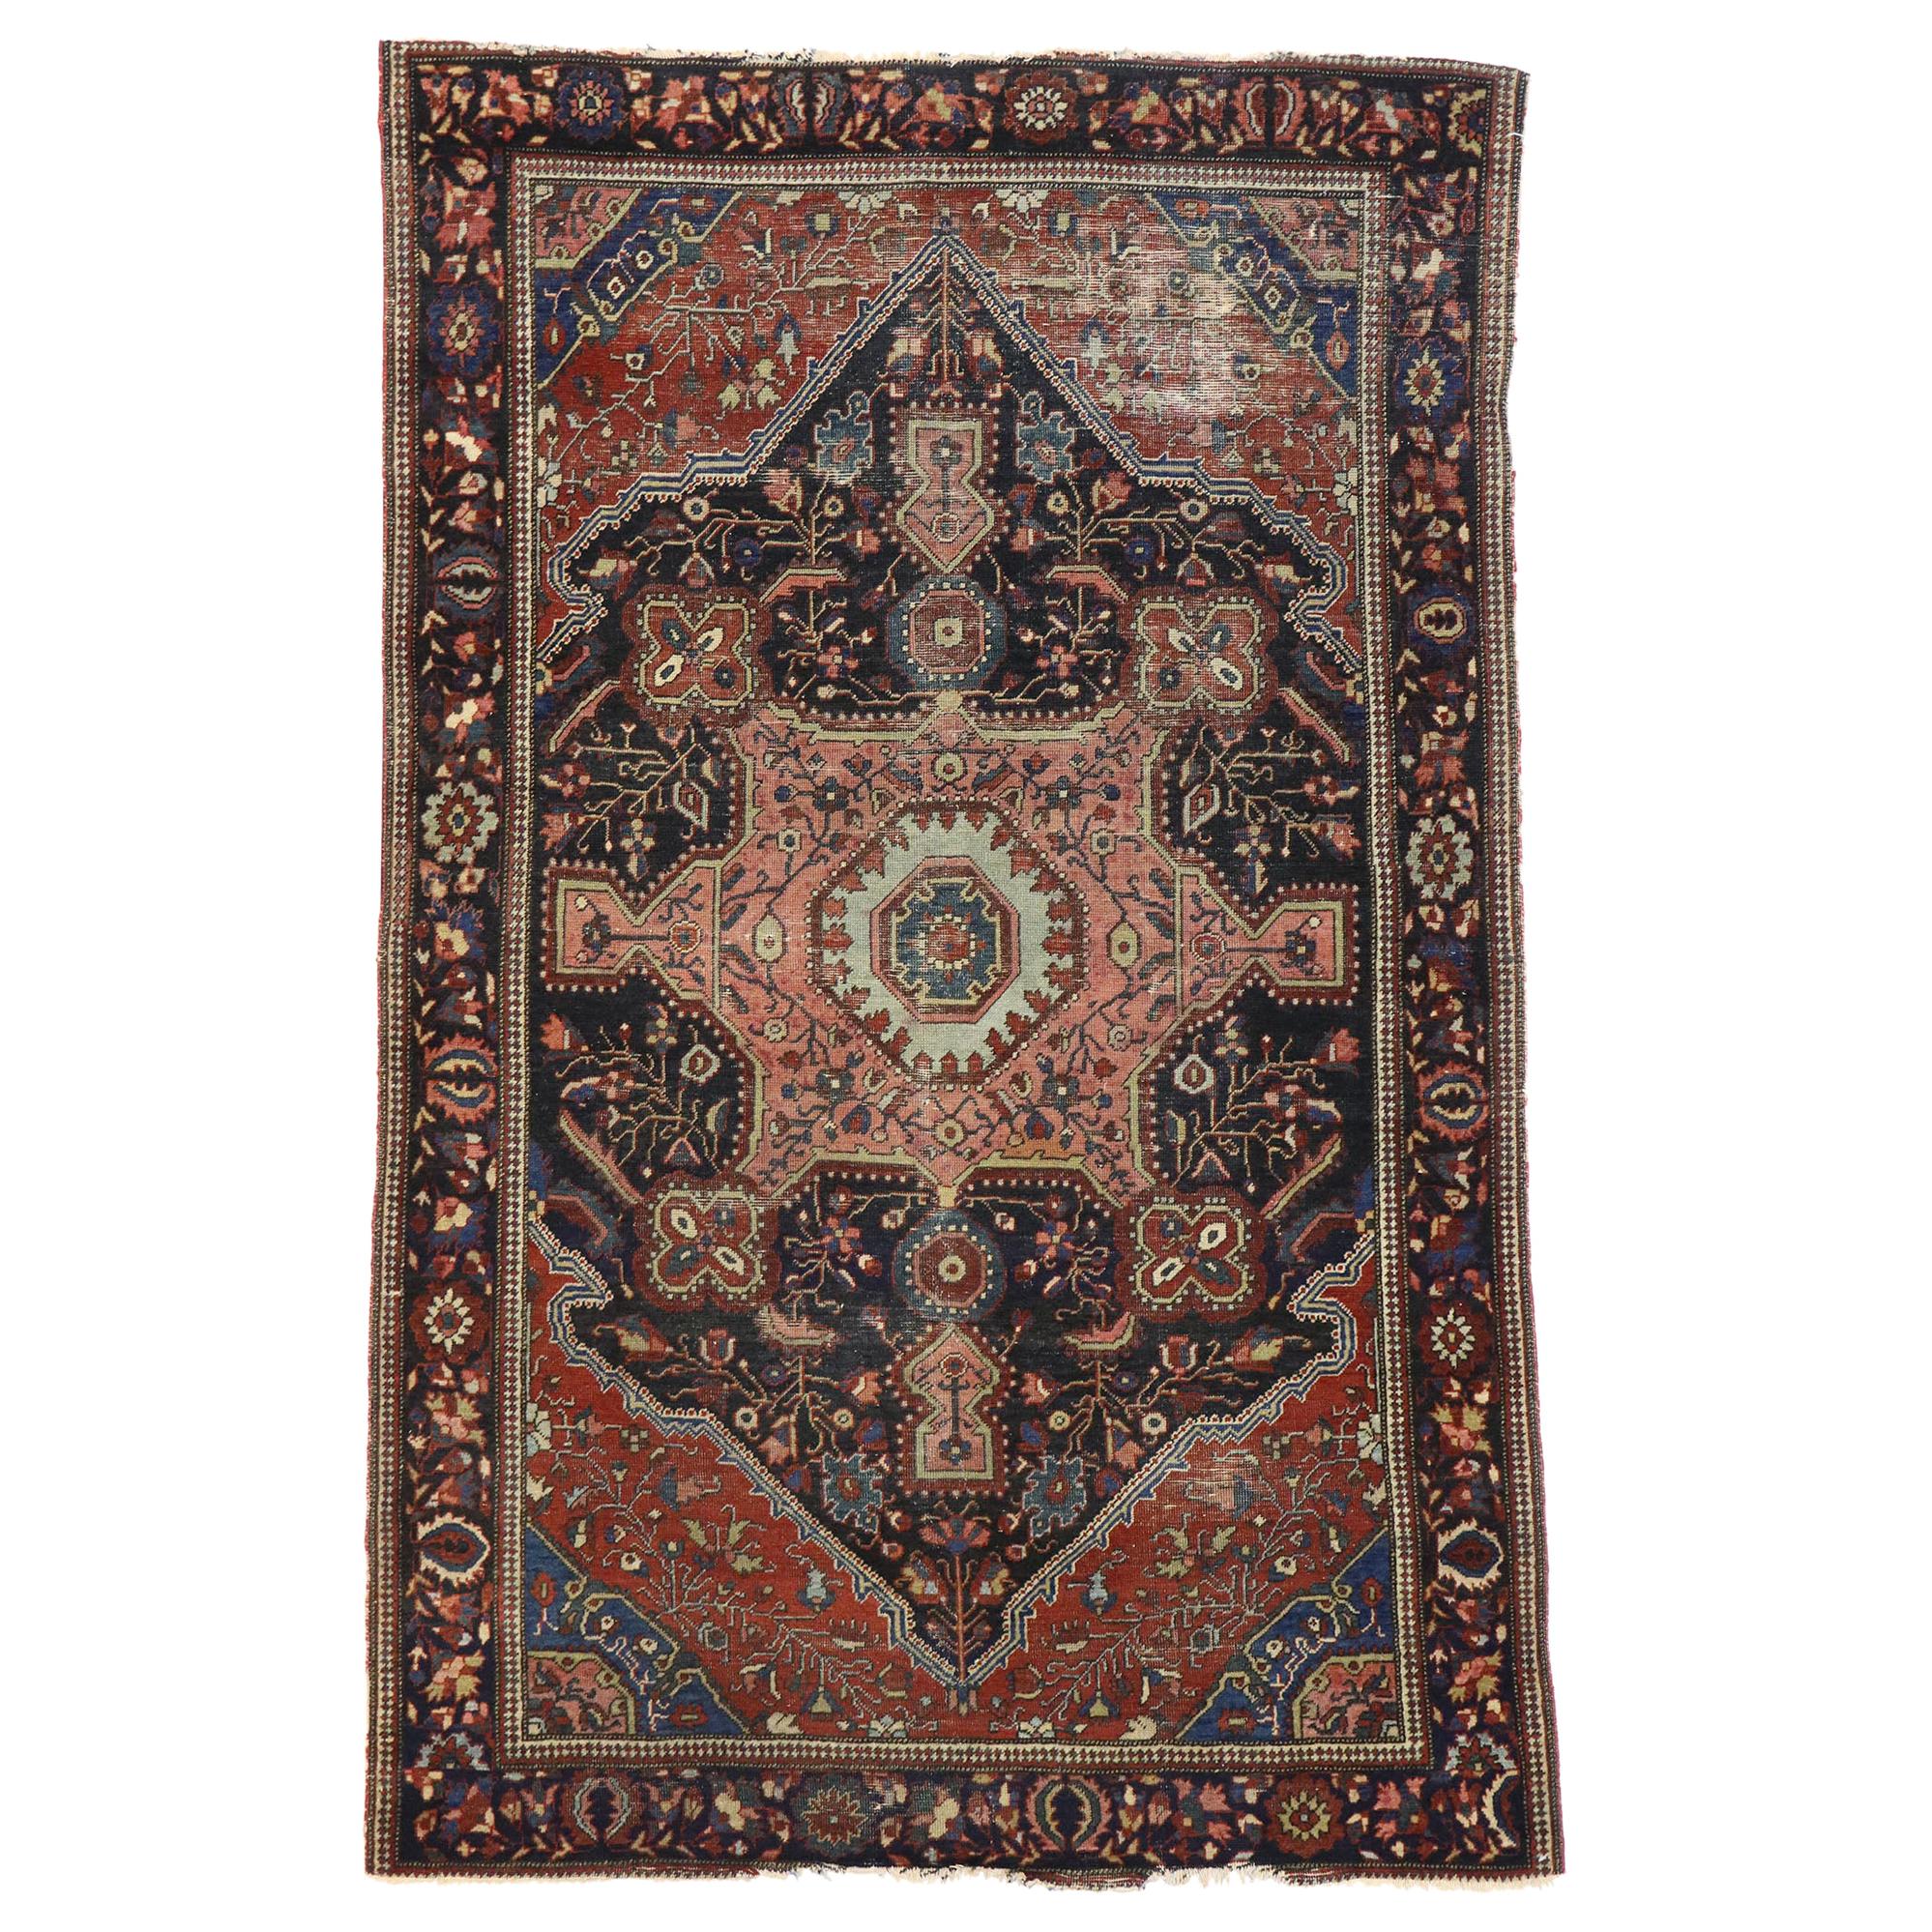 Distressed Antique Persian Farahan Rug with Victorian Farmhouse Style